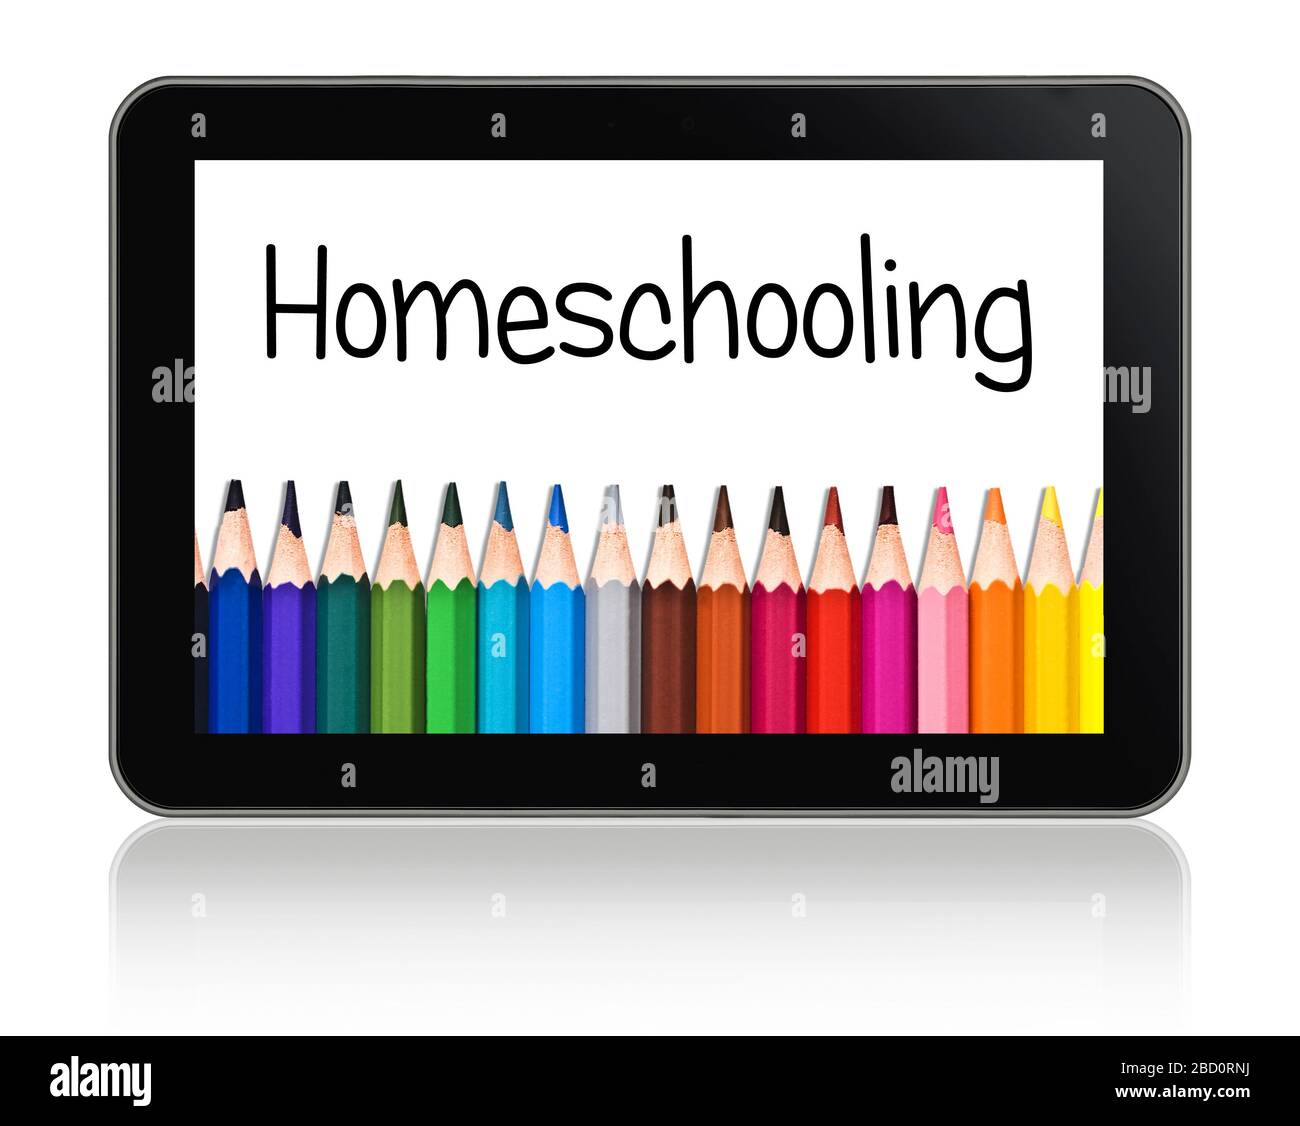 Homeschooling written on a tablet with a colorful lineof pencils Stock Photo